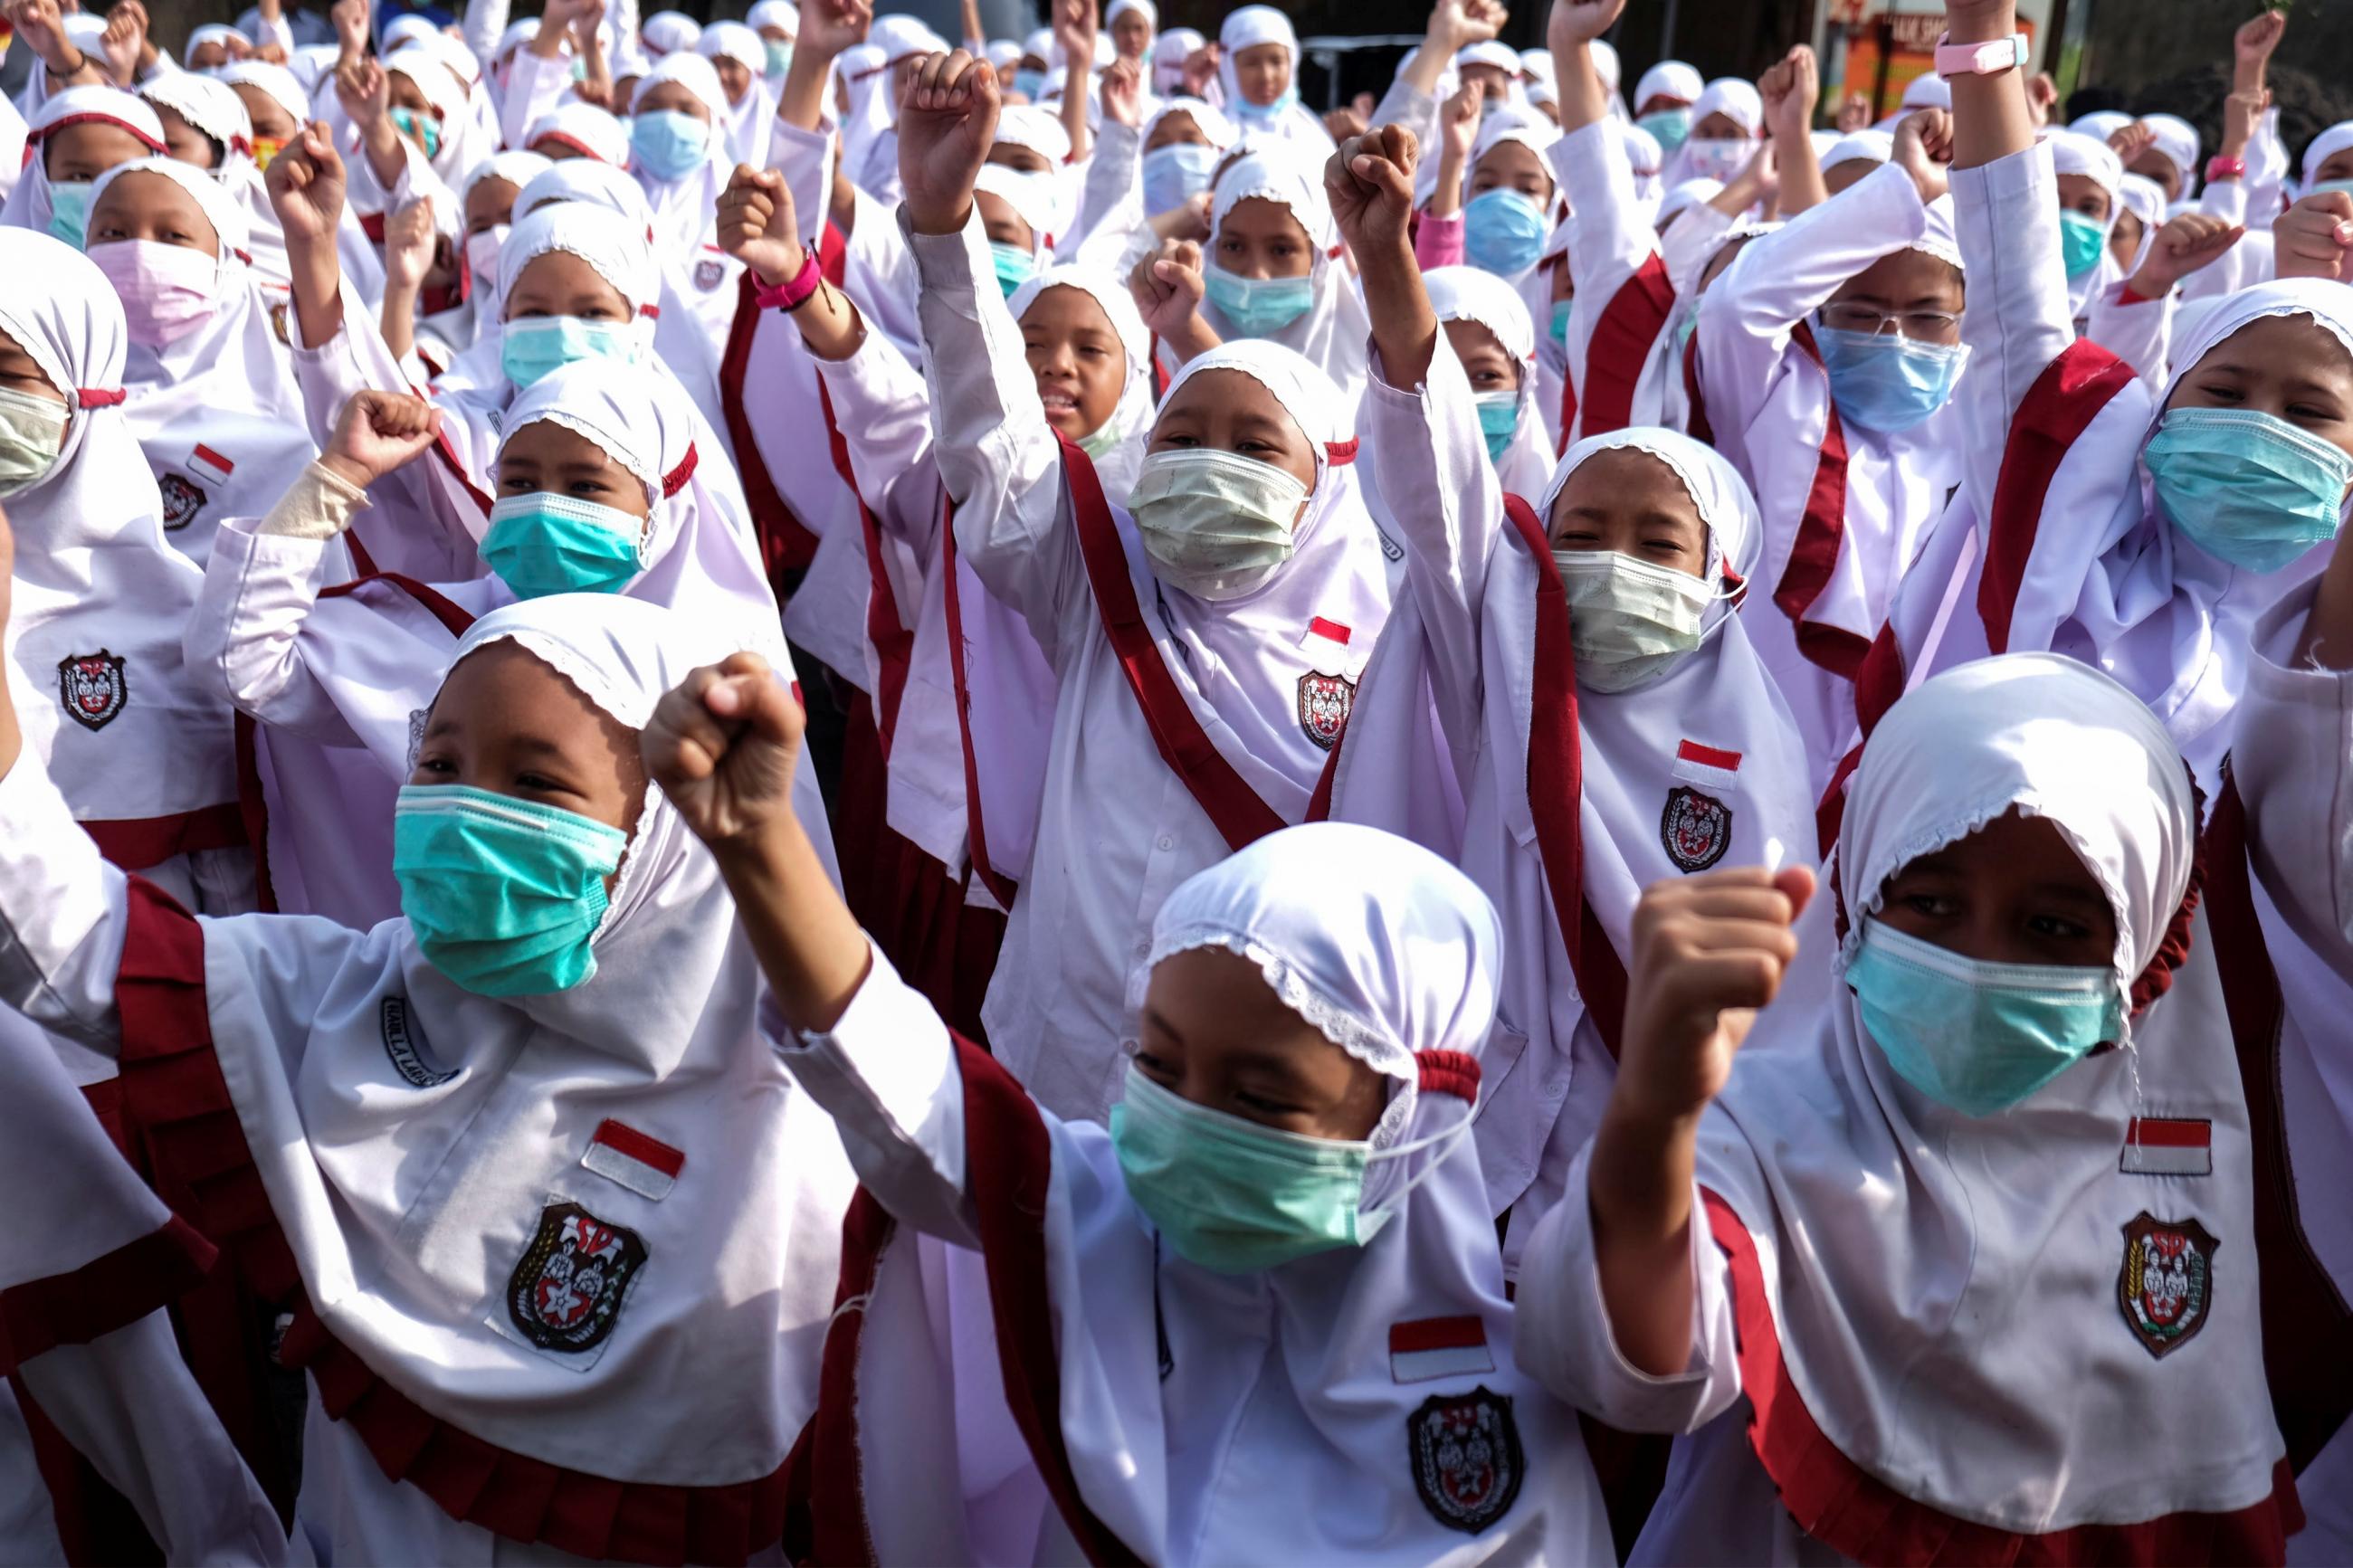 Students wear face masks during a health-care action rally dedicated to COVID-19 in Solo, Central Java, Indonesia on February 3, 2020 